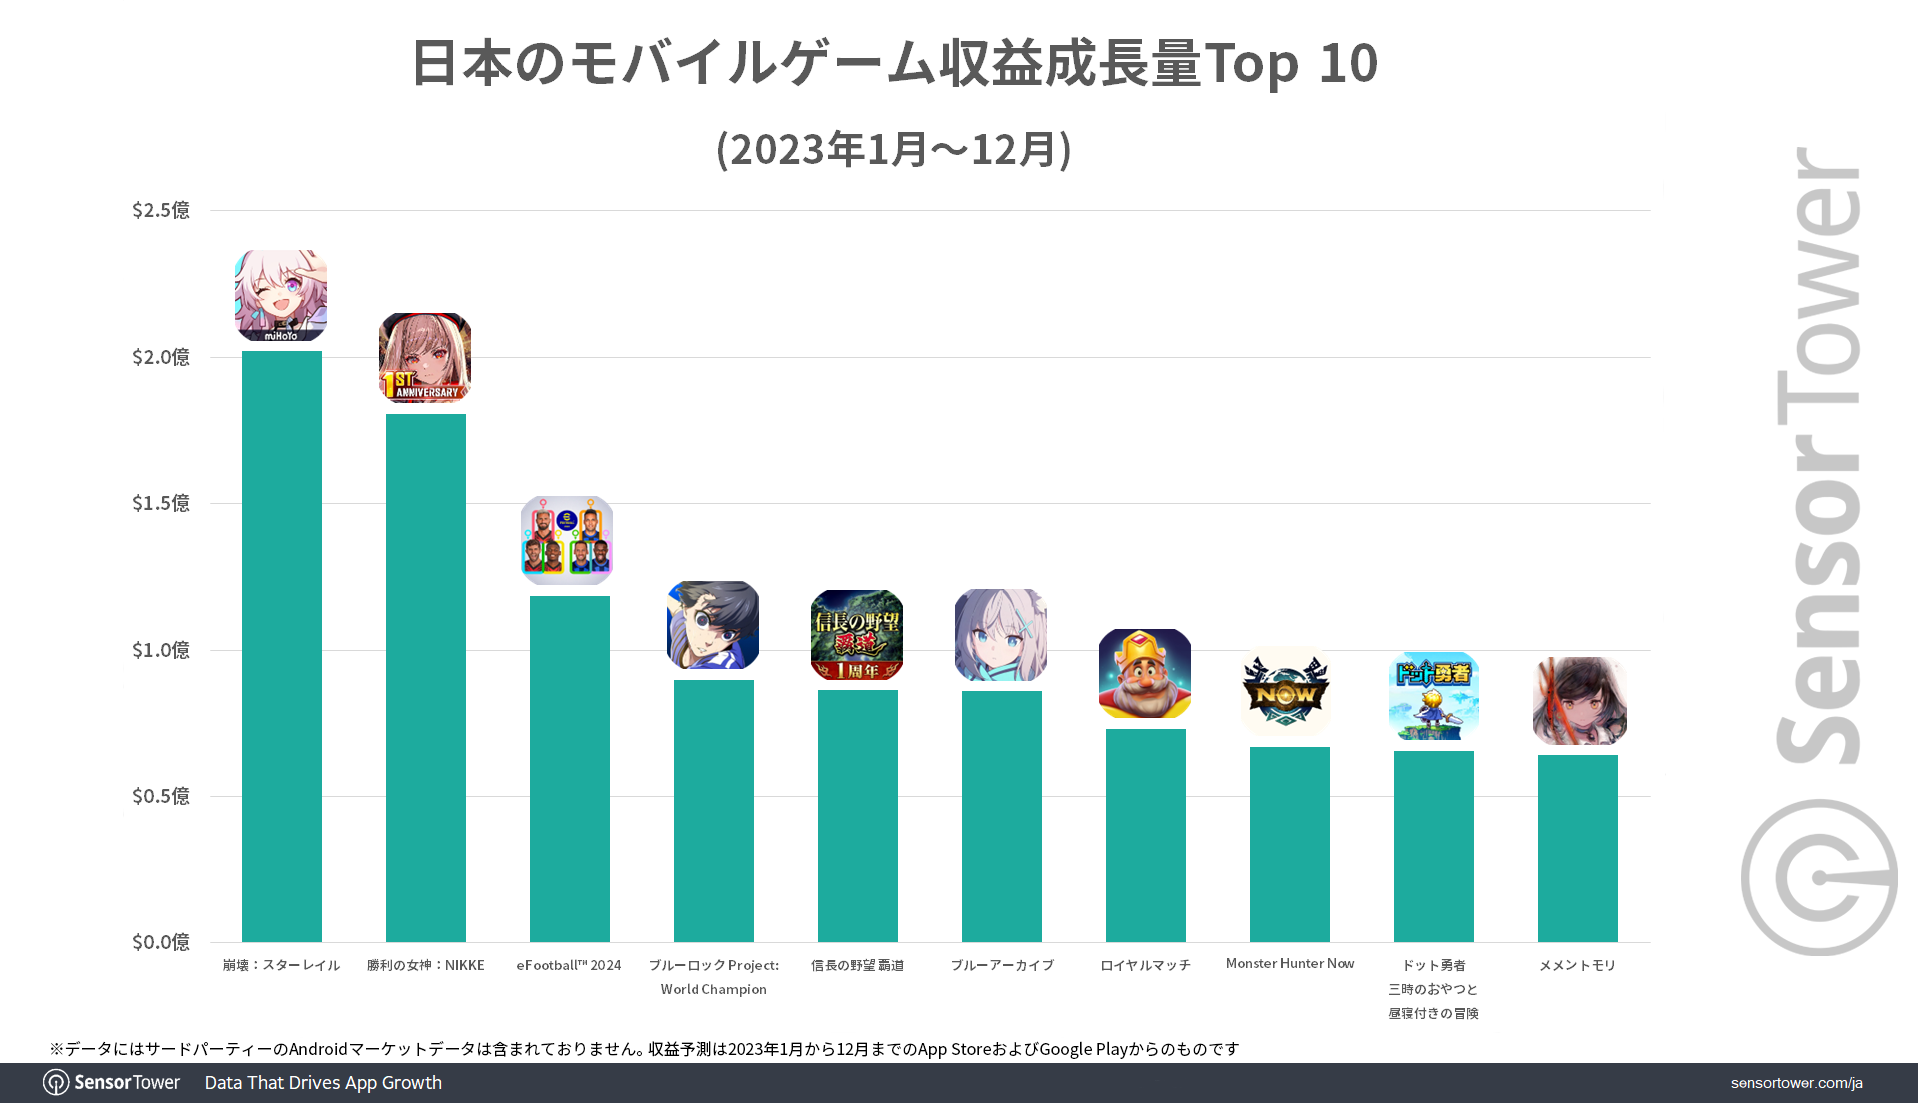 Revenue-Growth-Top-10-by-game-Japan